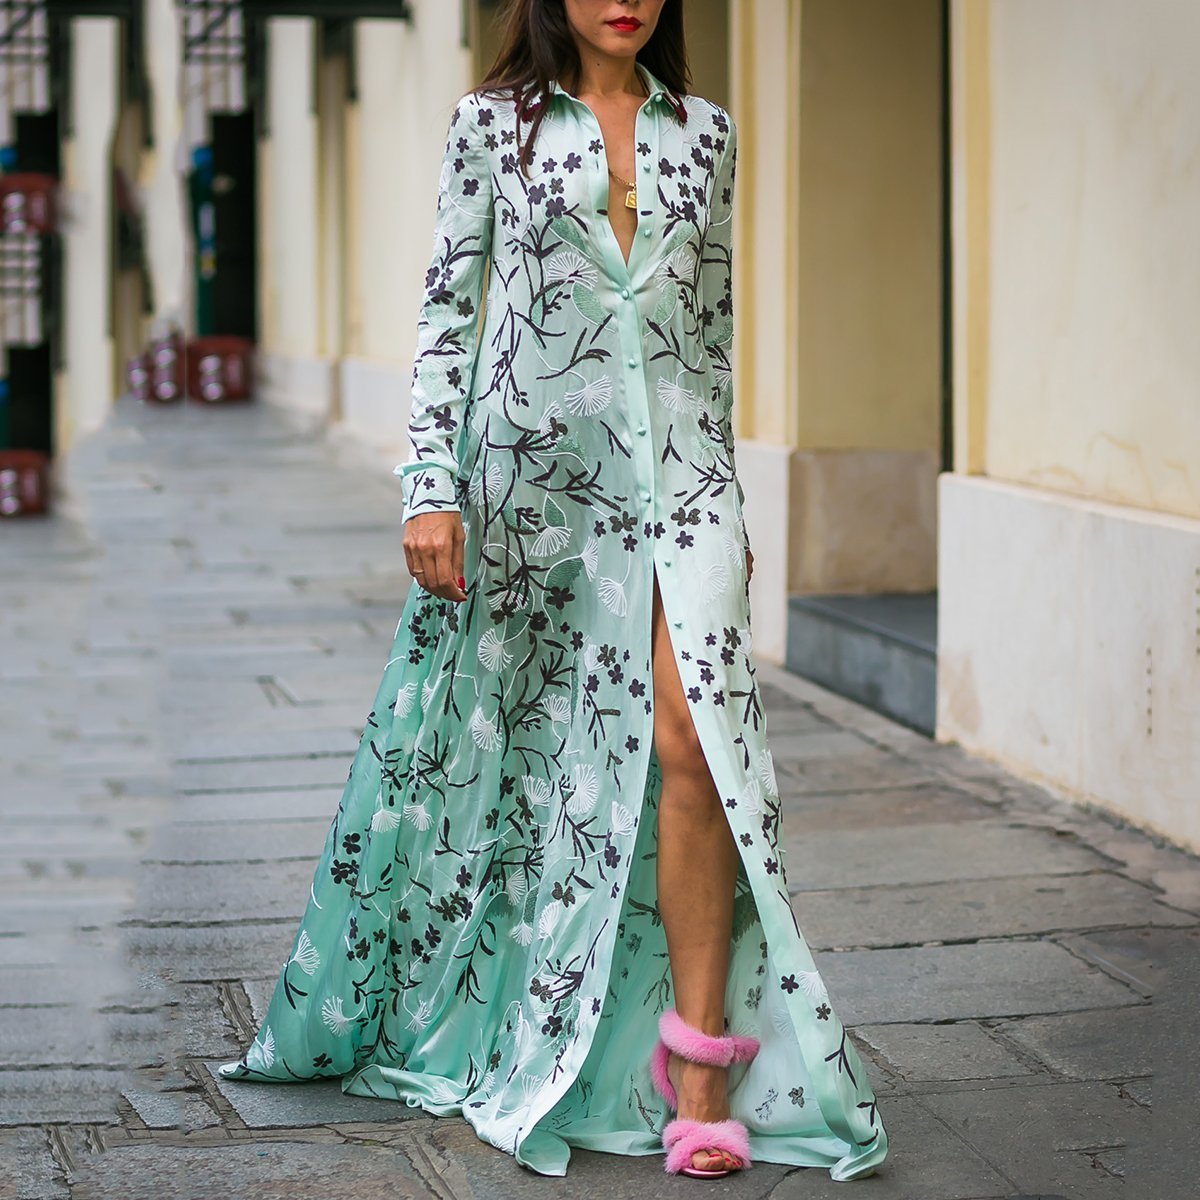 Sexy Floral Print Long Sleeves Dress